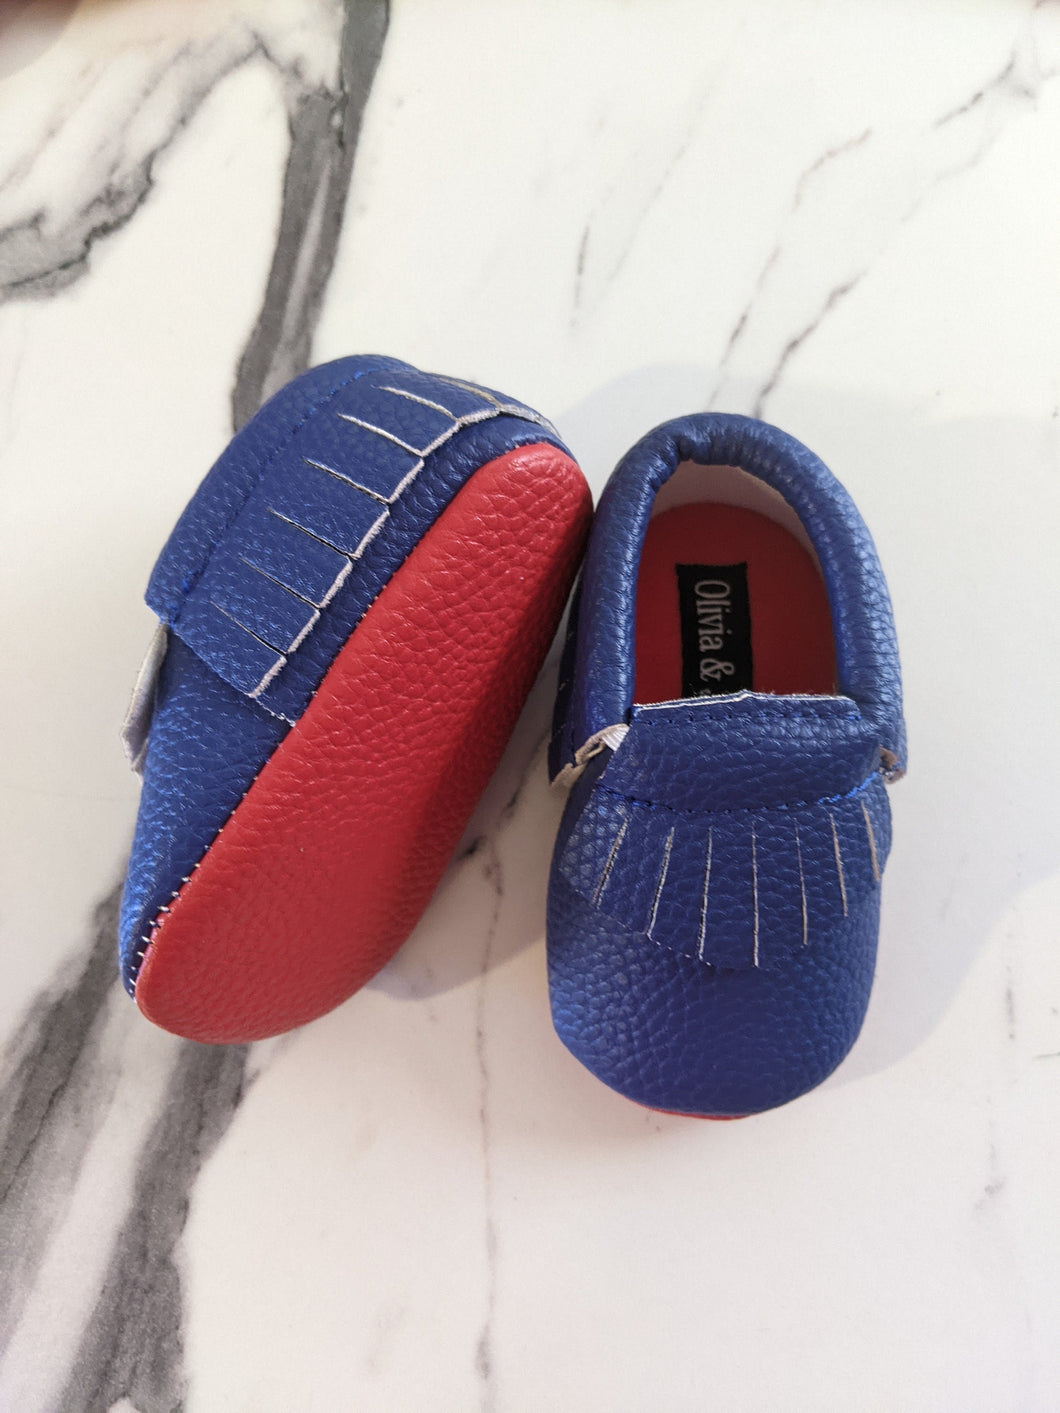 Red bottom Baby Moccasin Shoes Red bottom Louboutin Style Red Sole Mocs Photoshoot Baby Girl Baby Boy Red bottom moccasins- Fringe